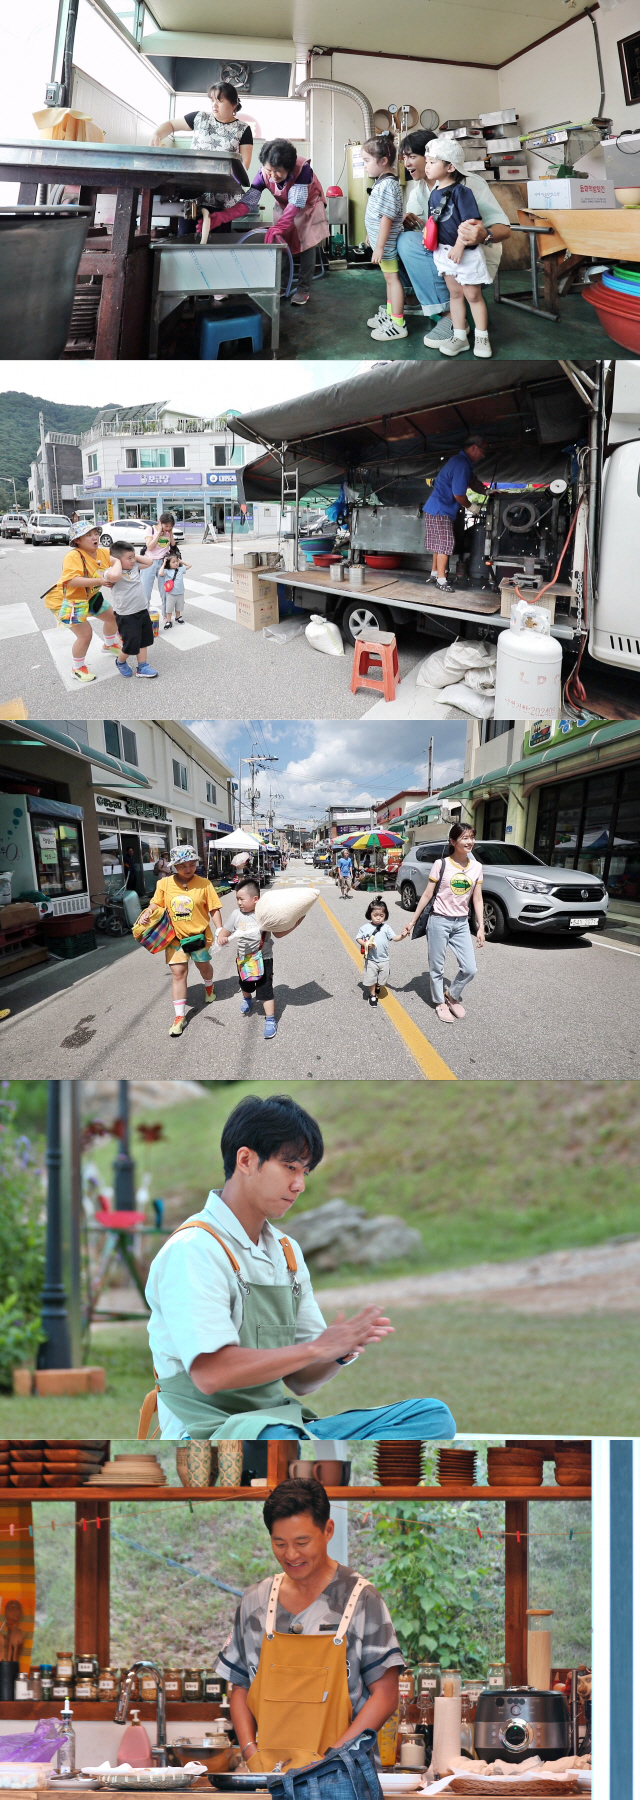 In the SBS Monday Entertainment Little Forest: Summer of the Blossom (hereinafter referred to as Little Forest), which is broadcast today (17th), Lee Seo-jin X Lee Seung-gi X Park Na-rae X Jung So-min, and the Welcome to Cheuseok market outing scene of four members and Little Lee will be released.Recently, members and Littles headed to the market to buy the ingredients needed for holiday food.Little, who showed up for the first time with the Uncle and aunt, was not particularly excited about the popping and rice cake picking.In addition, Little has received pocket money from the members and shopped what they wanted to buy, and they are looking forward to what kind of things Little people who have bought in first shopping of their lives.After returning home from shopping, the members made Songpyeon with Little.Lee Seung-gi, who became the Master Show of Songpyeon with his unexpected Songpyeon ability, raised his confidence to the peak of I will have a beautiful daughter to Park Na-rae, and tasted his songpyeon and said, Songpyeon of the Year I laughed because I didnt stop.Lee Seung-gis Songpyeon of the Year was able to capture the taste of Little.Members and Littles Welcome to Cheuseok shopping and songpyeon making scene can be found at Little Forest which is broadcasted at 10 oclock tonight.